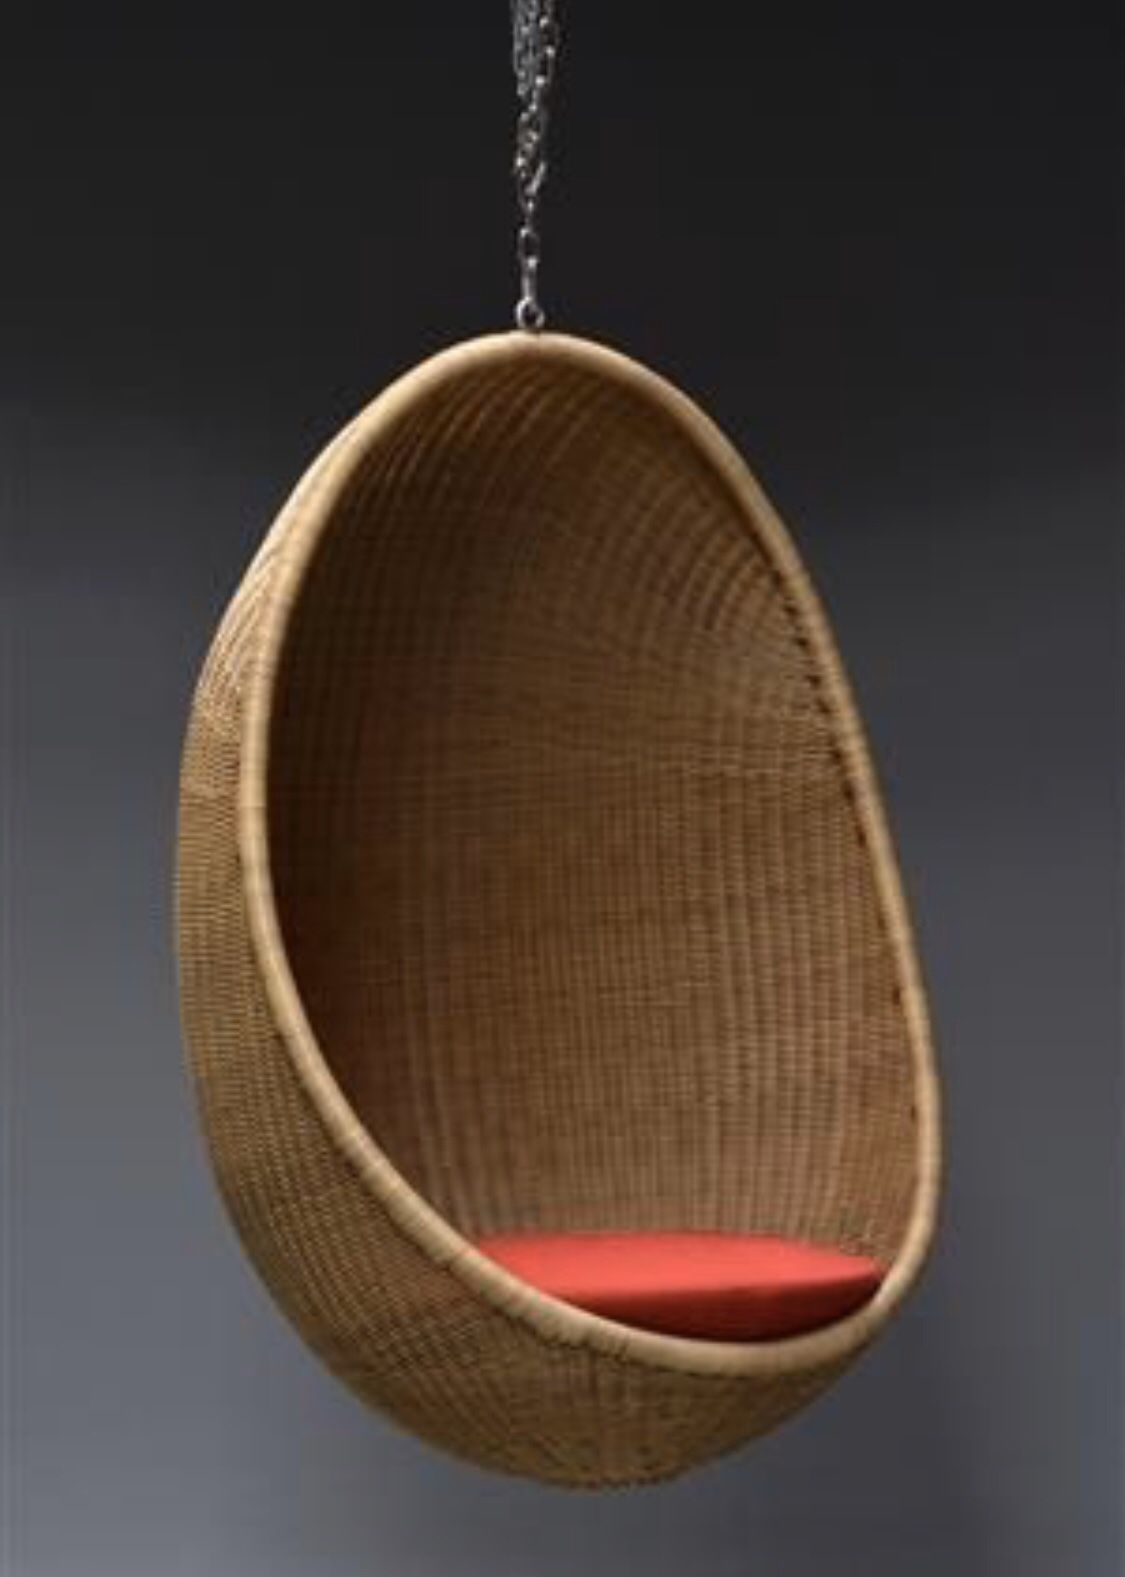 1 Hanging wicker Egg Chair